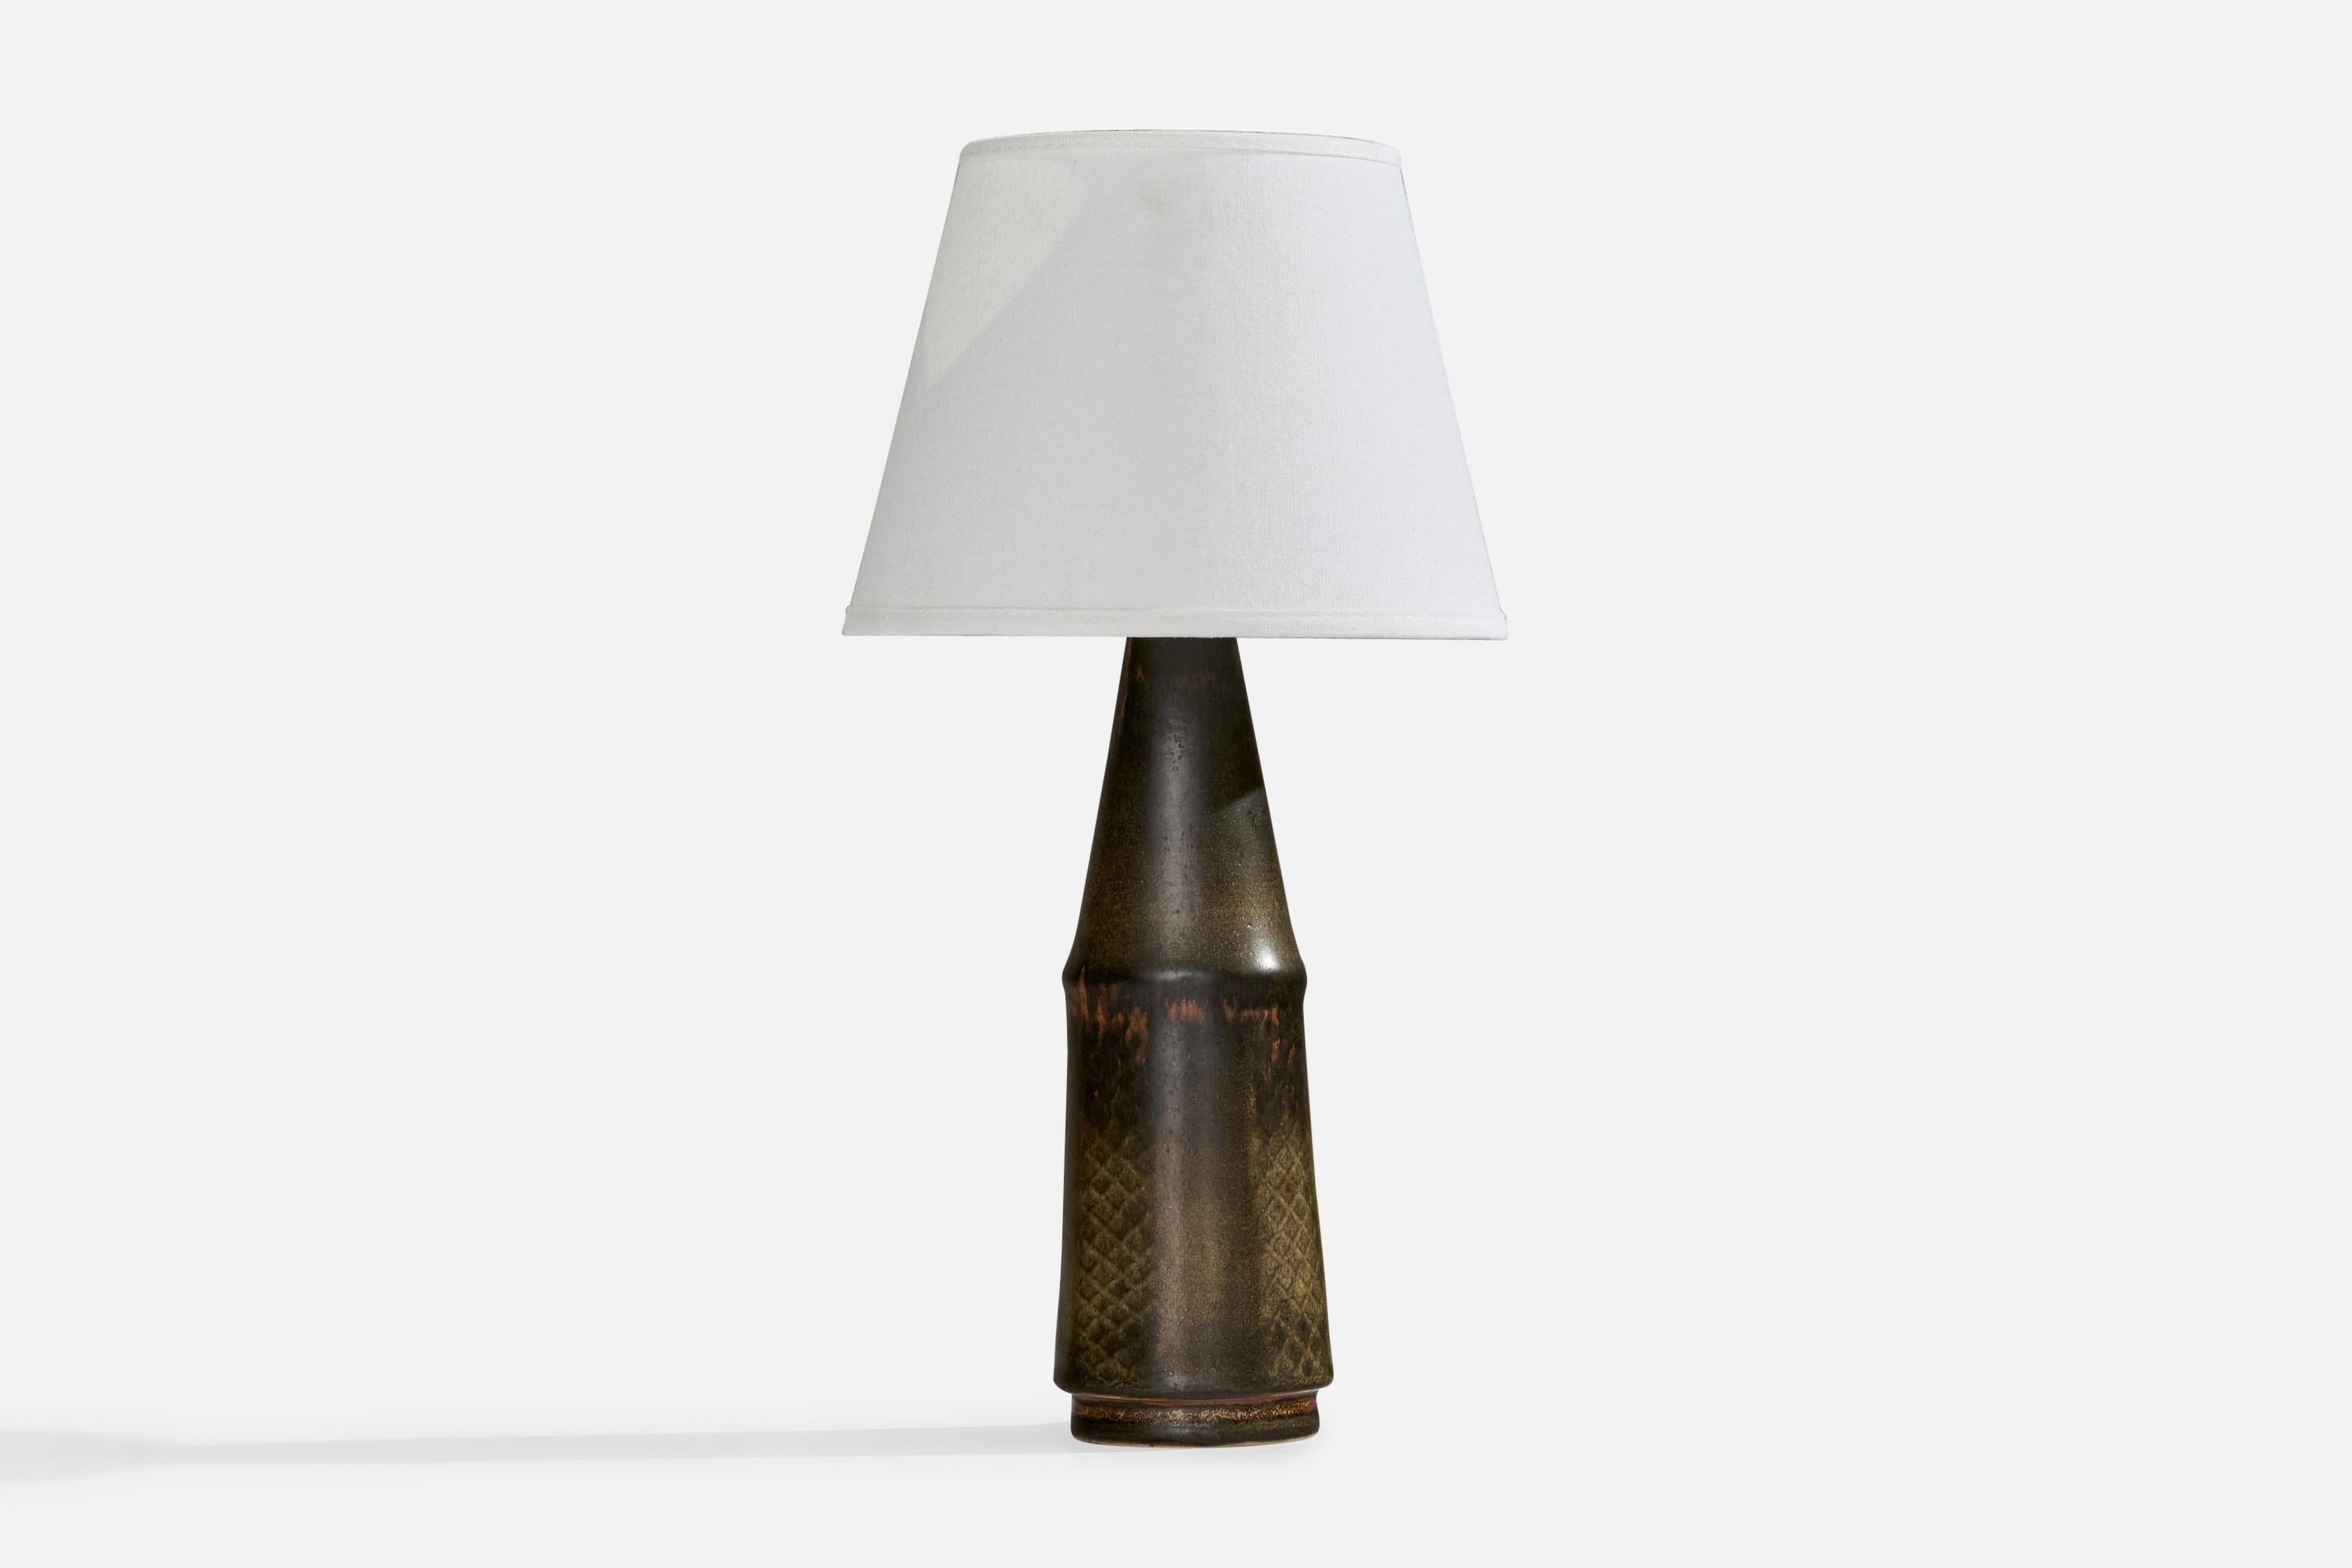 A unique grey-glazed and incised table lamp designed by Carl-Harry Stålhane and produced by Rörstrand, Sweden, 1950s.

Dimensions of Lamp (inches): 13” H x 3.45”  Diameter
Dimensions of Shade (inches): 5.5”  Top Diameter x 7.75”  Bottom Diameter x